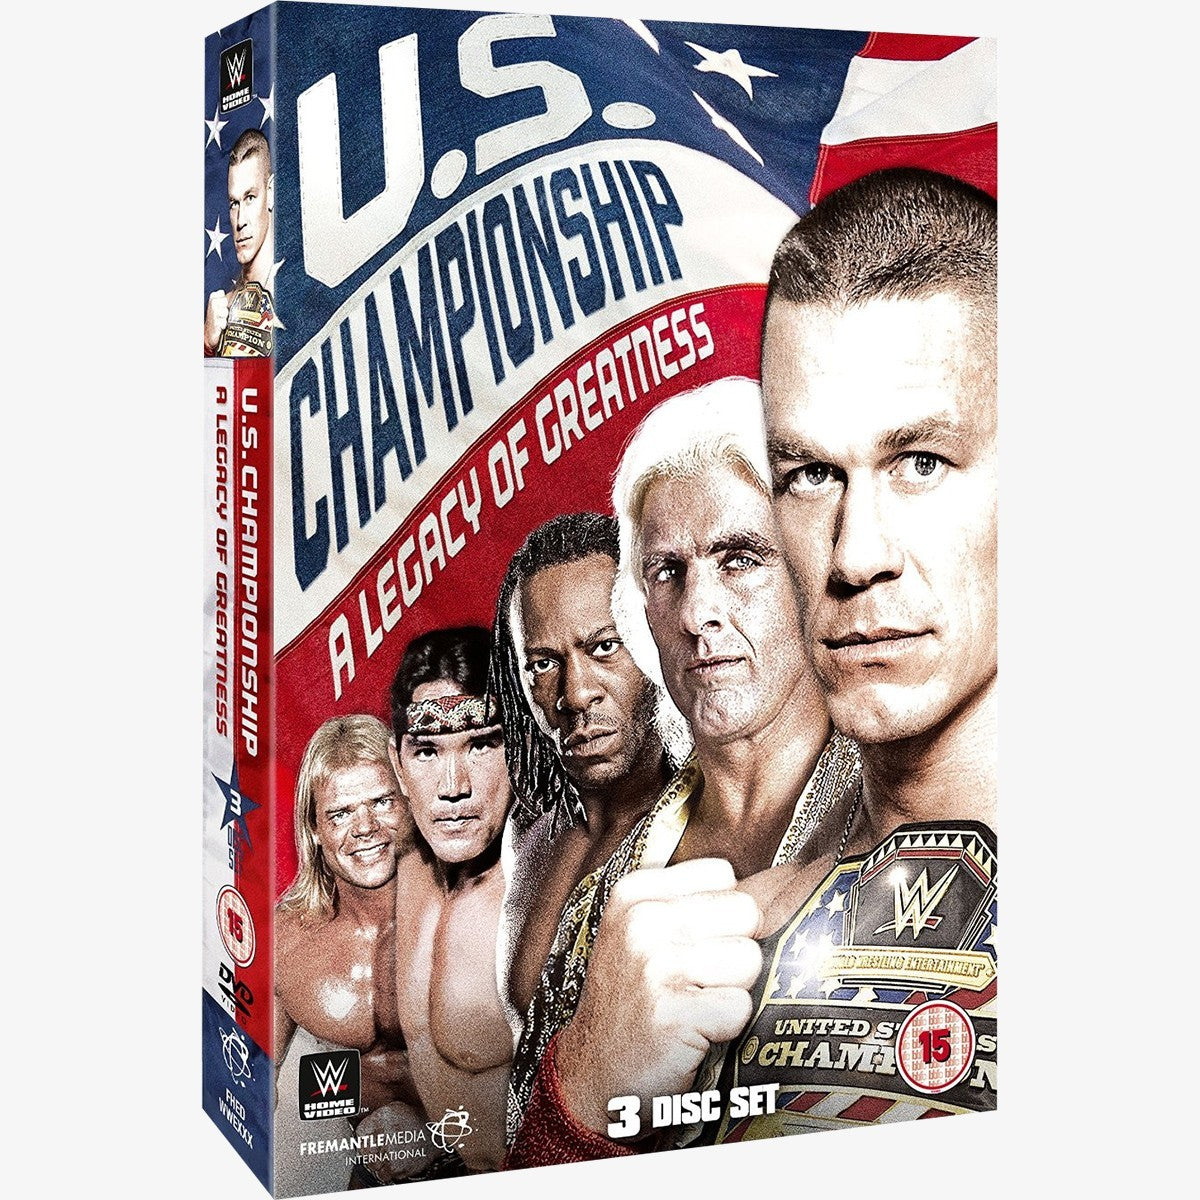 WWE United States Championship: A Legacy of Greatness DVD